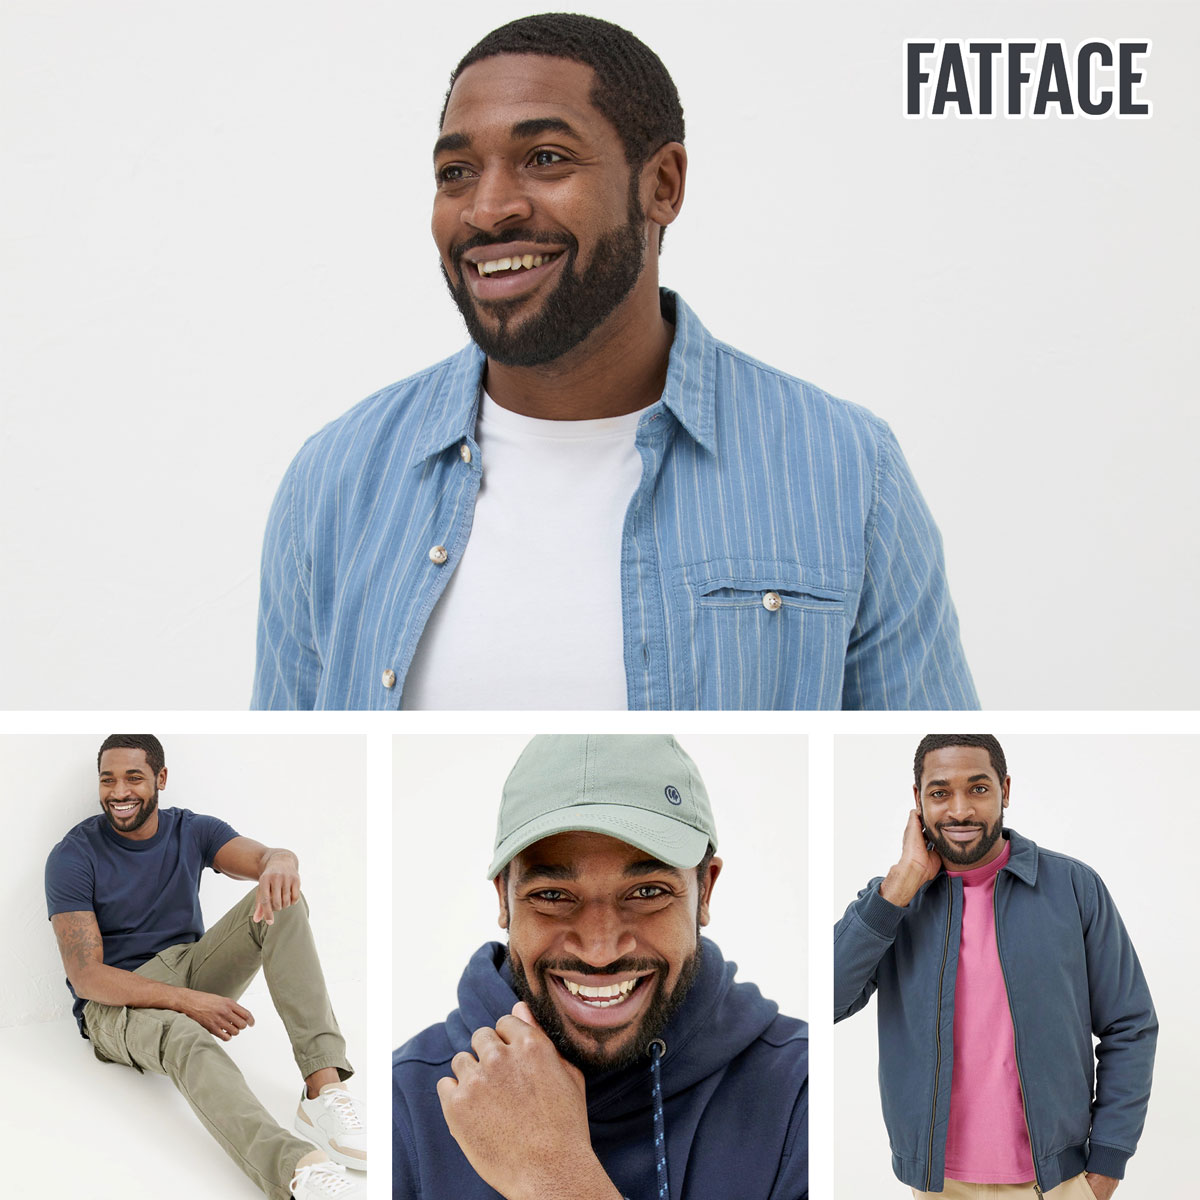 akil for fatface